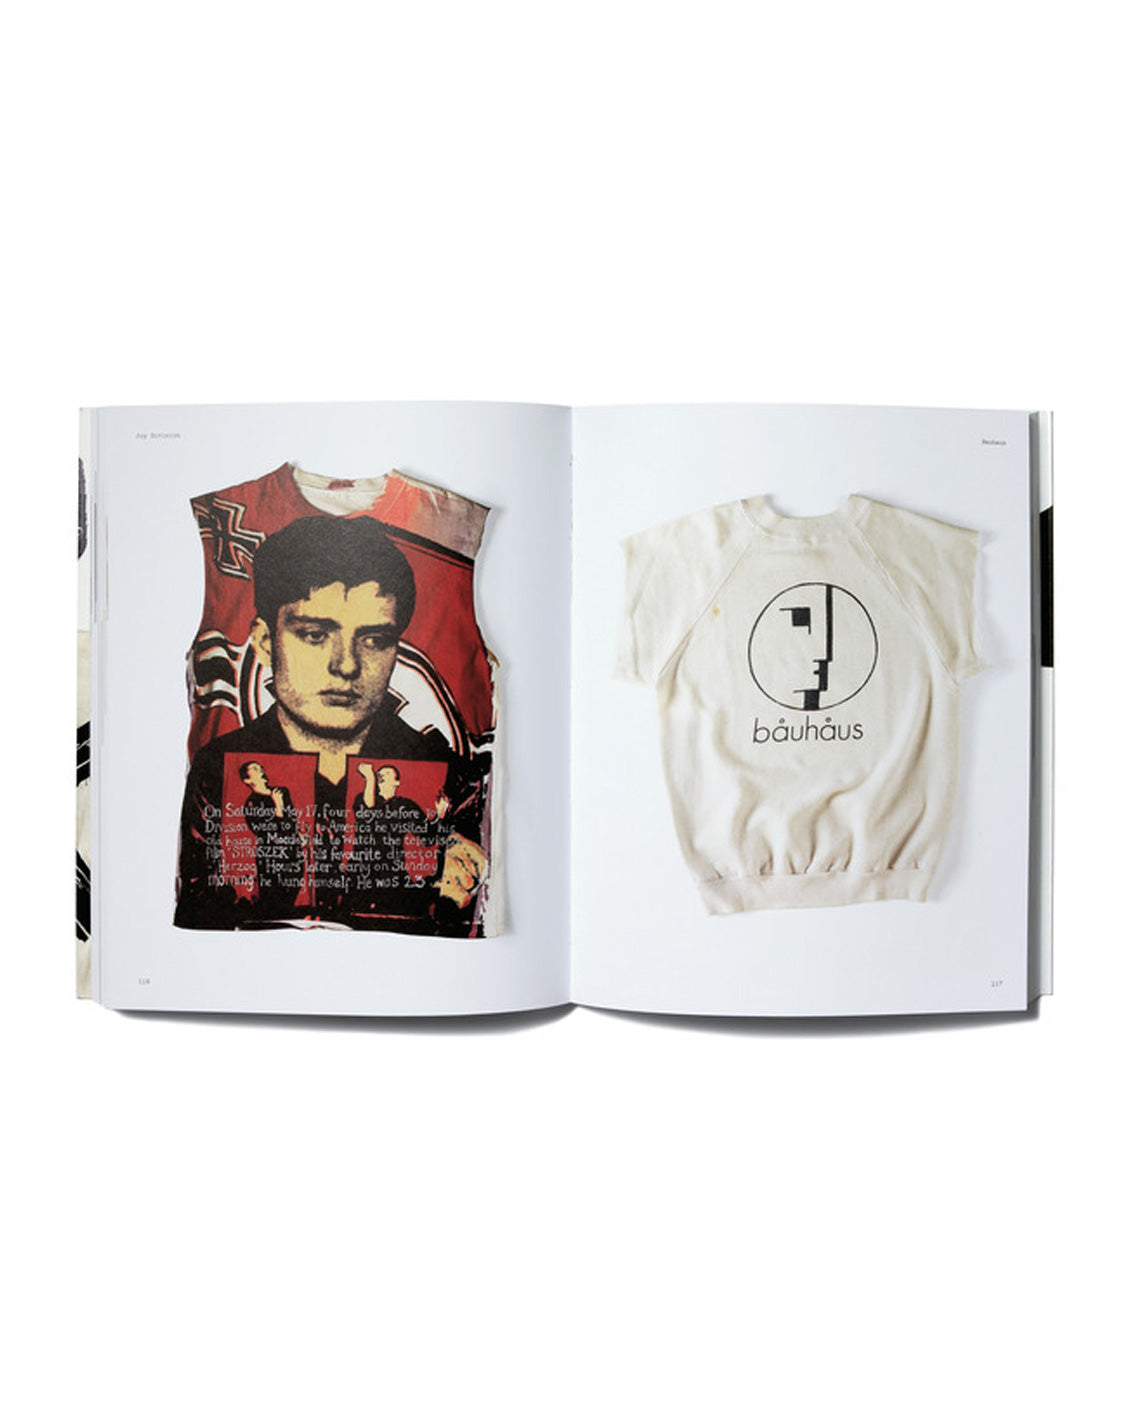 Rizzoli - Ripped: T-Shirts from the Underground